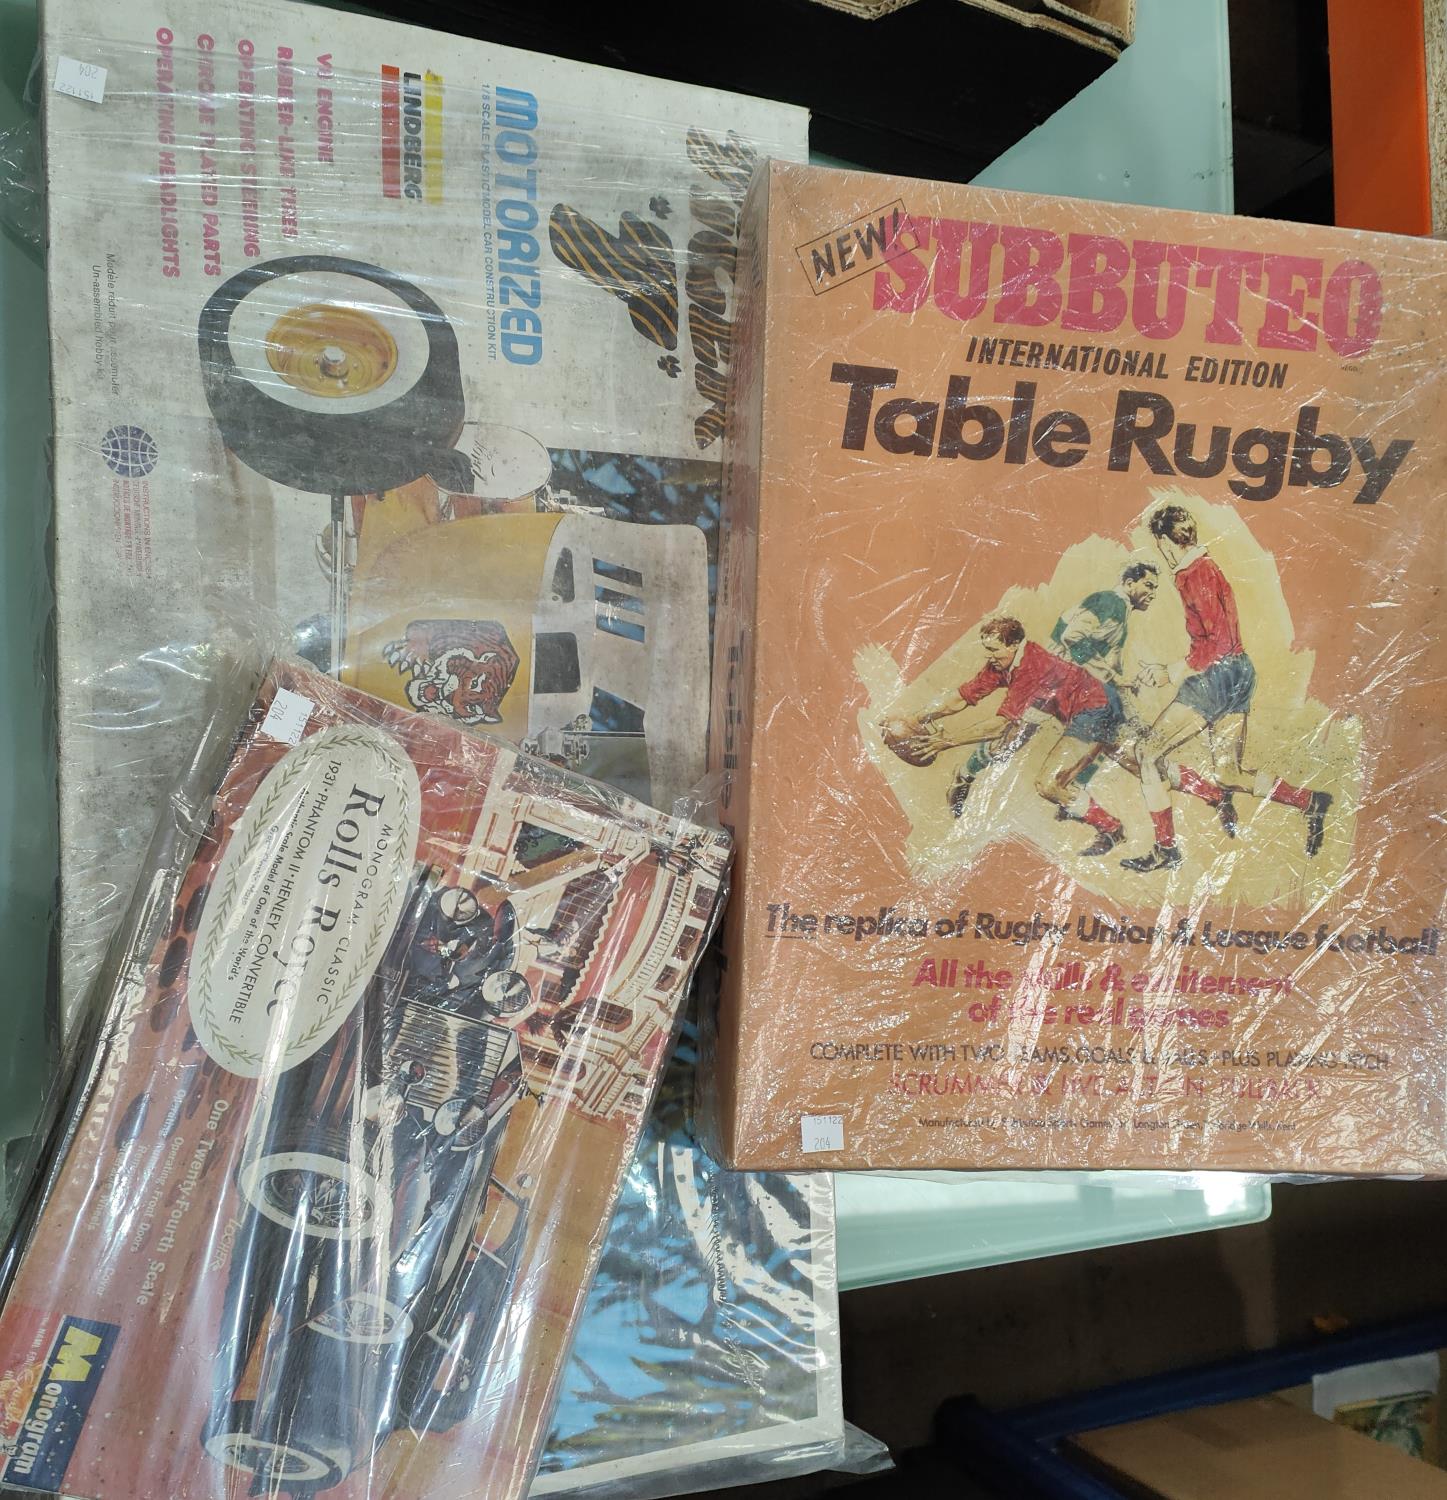 A Kit Car "Tiger T"; a Kit Car Rolls-Royce; a Subbuteo table rugby, all in original boxes